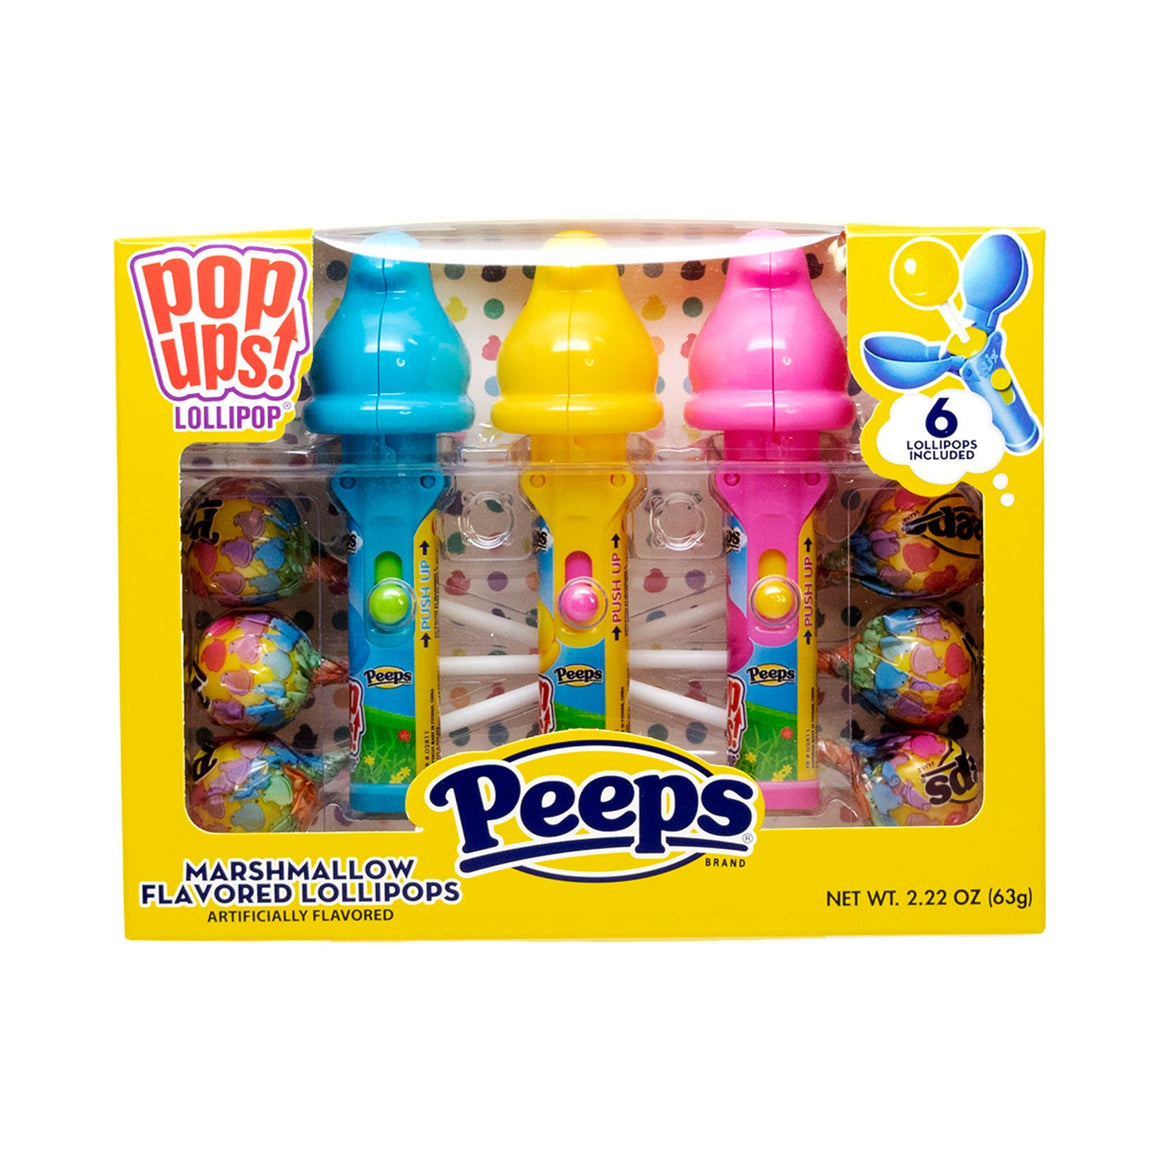 Peeps Pop Ups Blister Gift Set. A fun gift for your Peep Collector.  For fresh candy and great service, visit www.allcitycandy.com